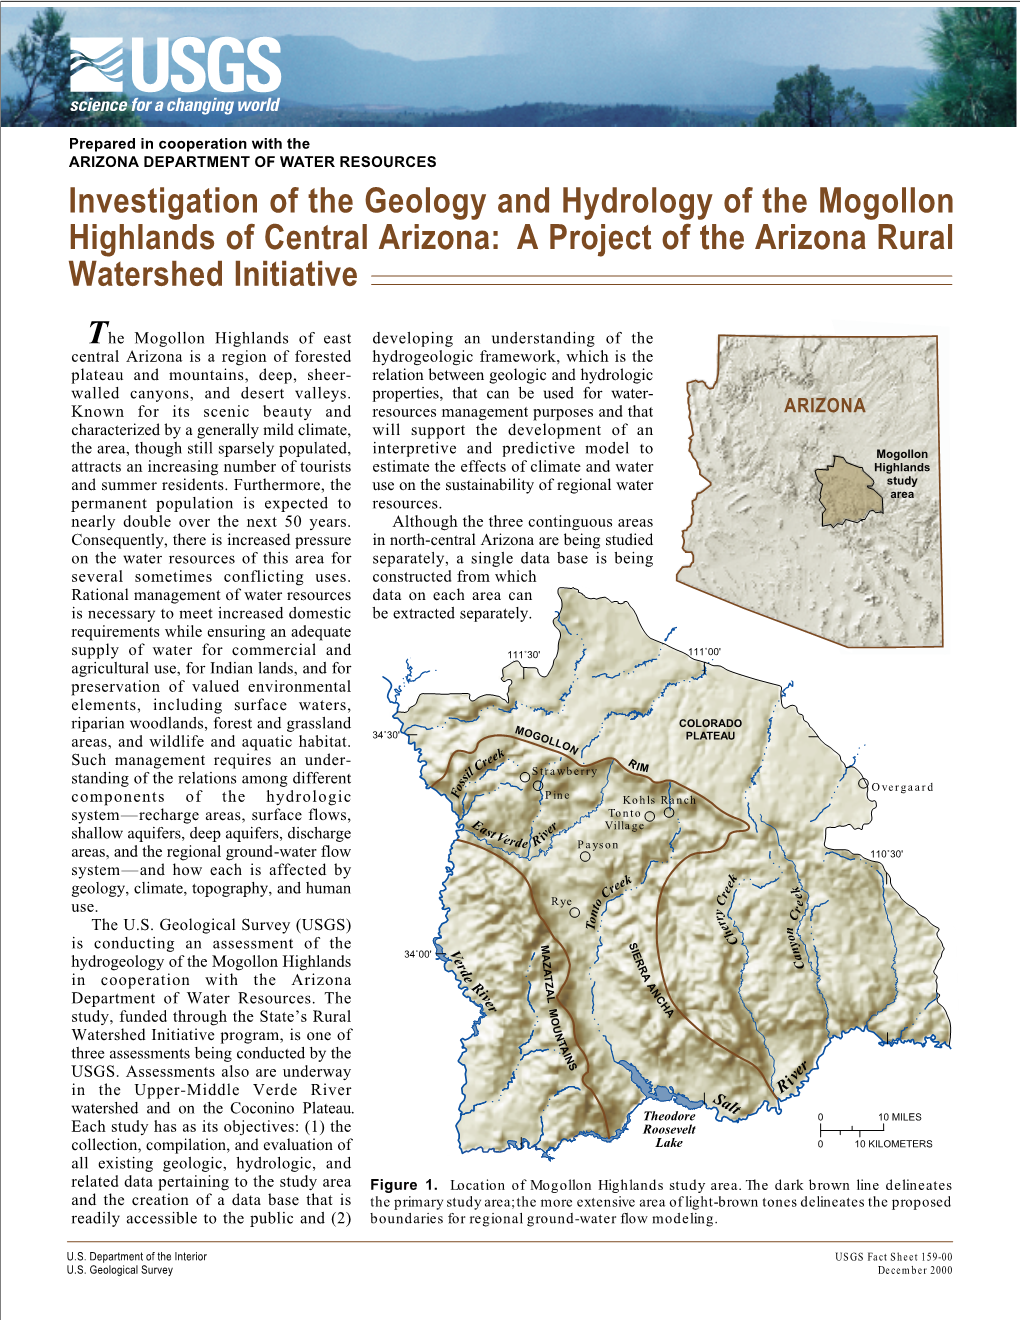 Investigation of the Geology and Hydrology of the Mogollon Highlands of Central Arizona: a Project of the Arizona Rural Watershed Initiative